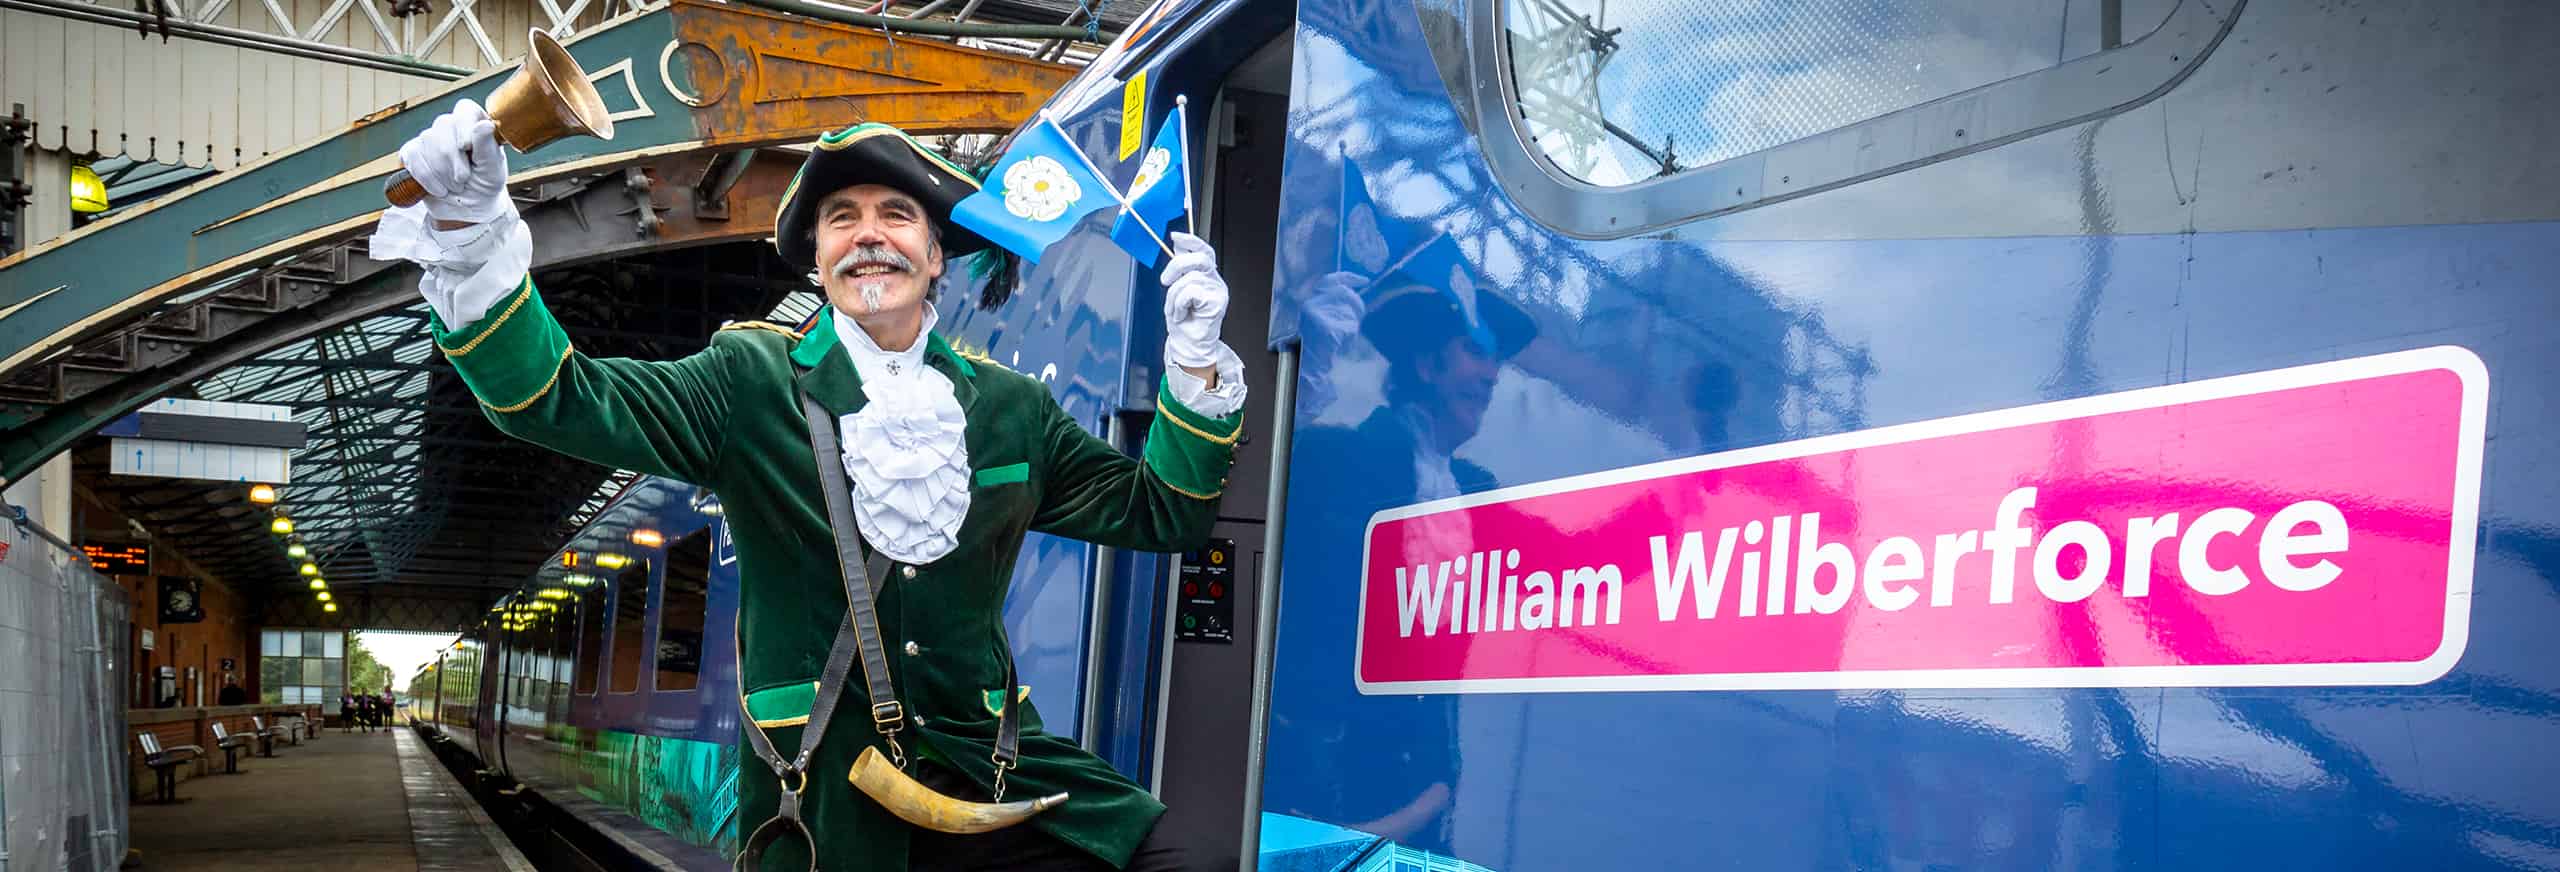 Town Crier on board a Hull Trains service